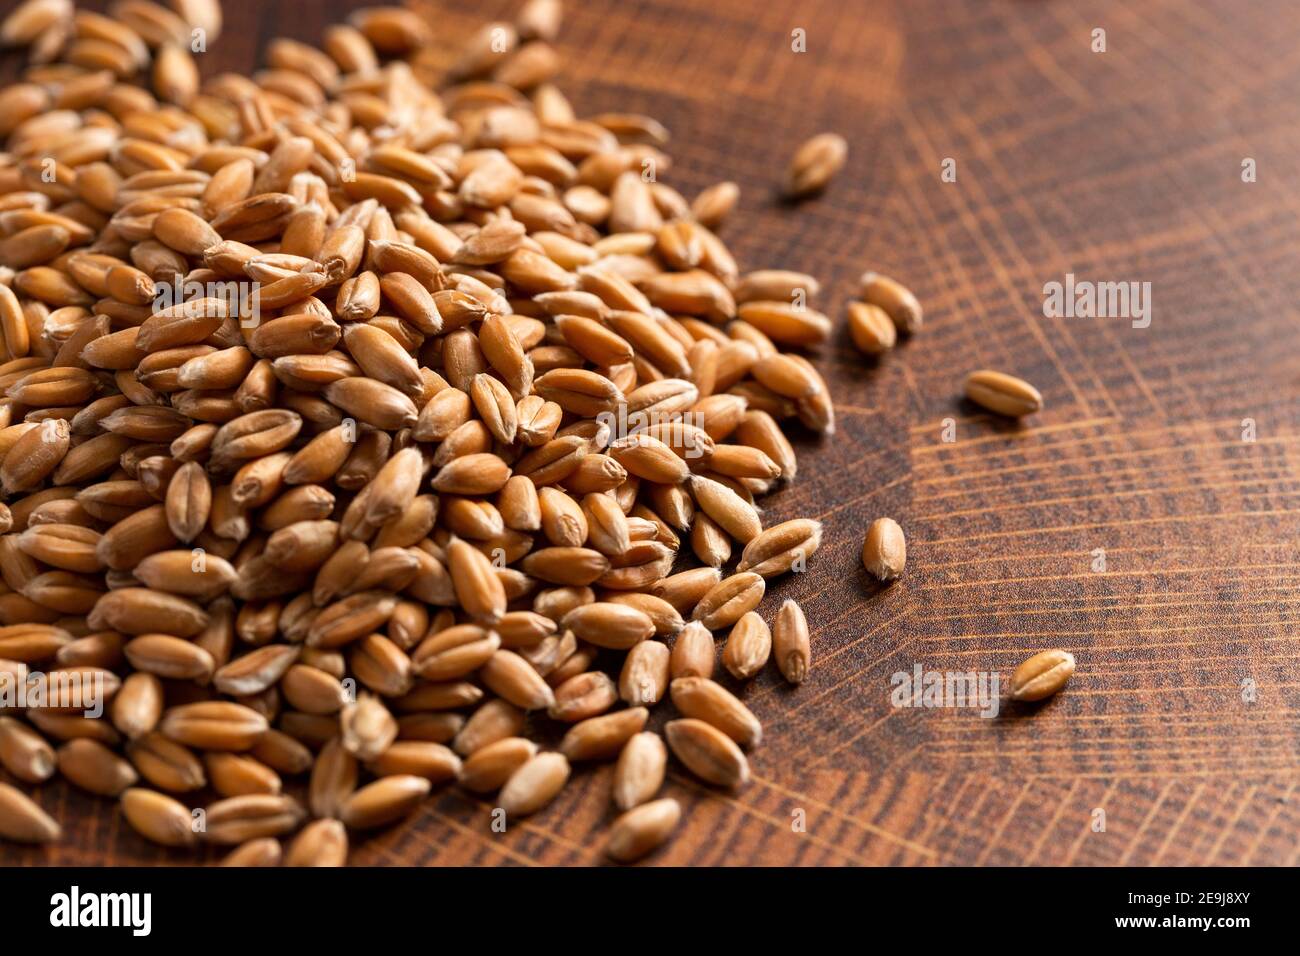 A Pile of Spelt Grain on a Wooden Butchers Block Stock Photo